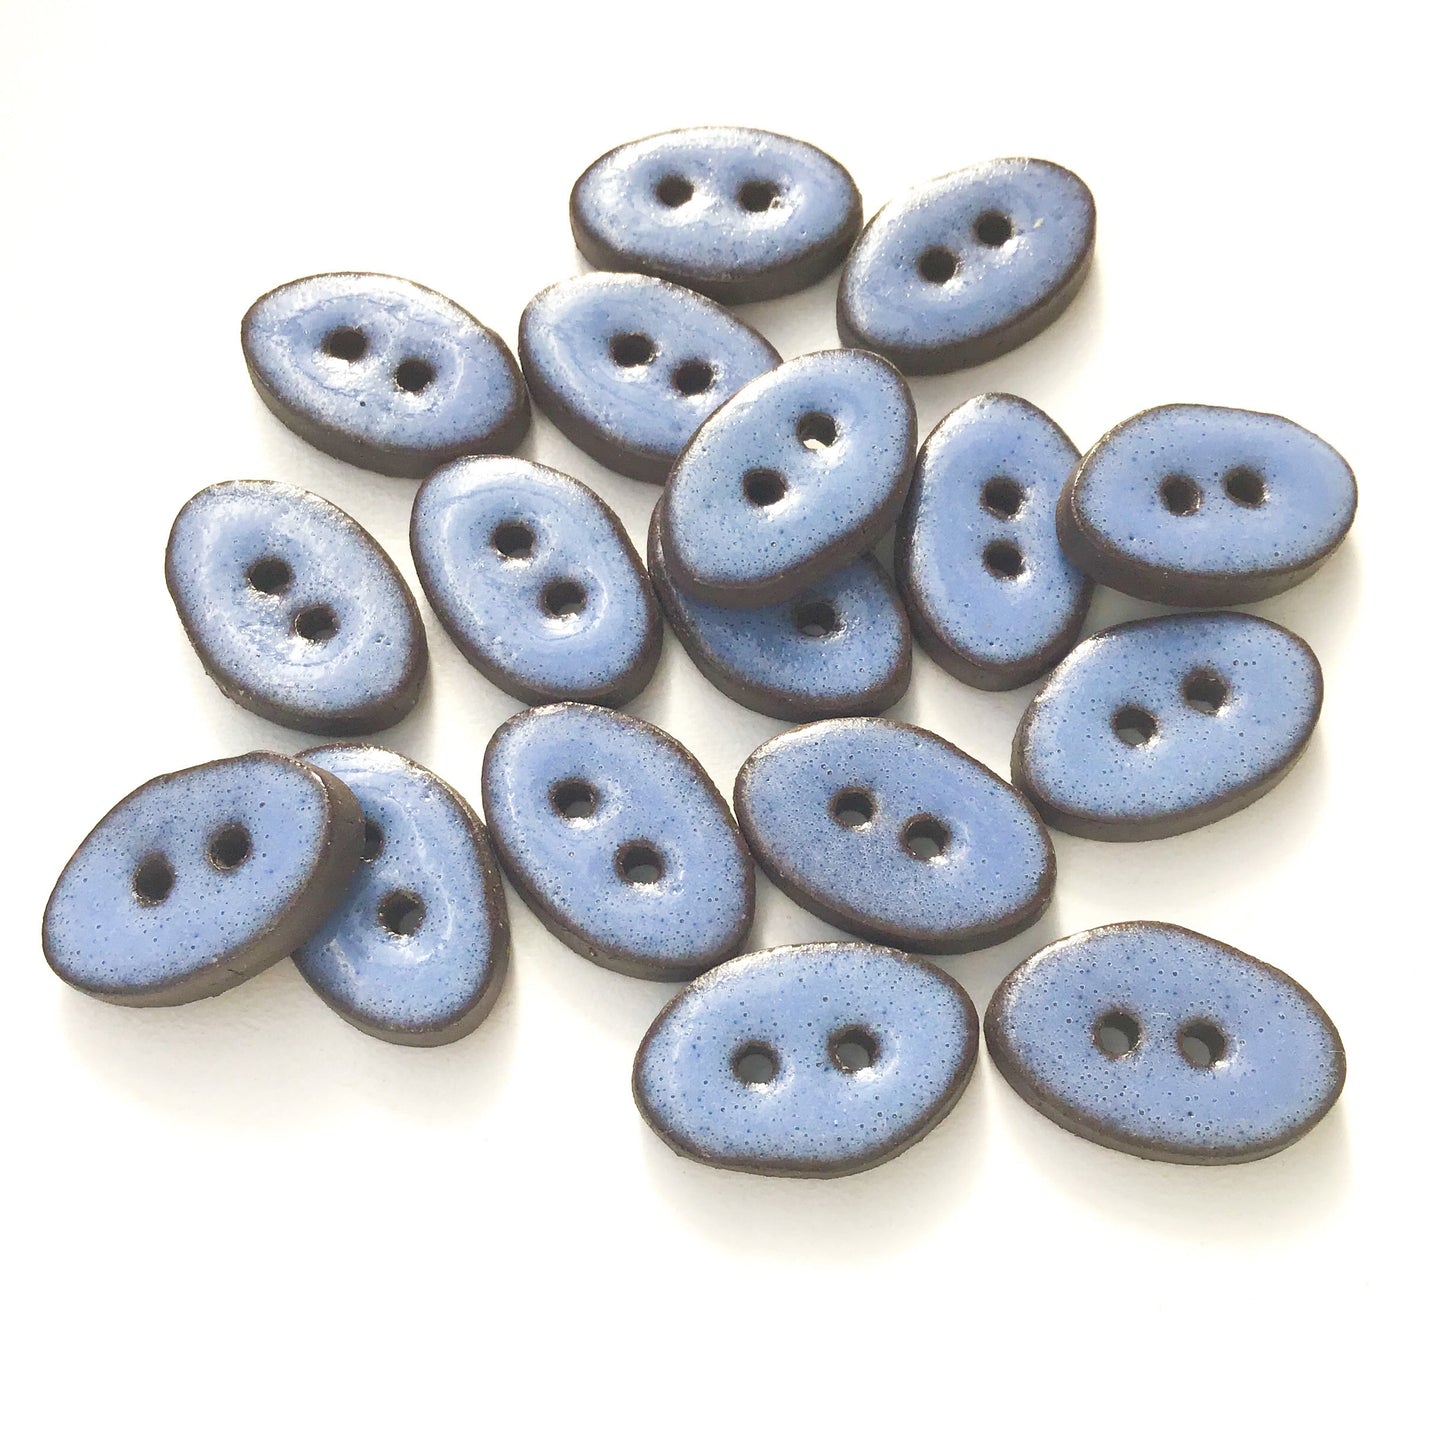 Blue Oval Clay Buttons on Black Clay - 1/2" x 3/4"